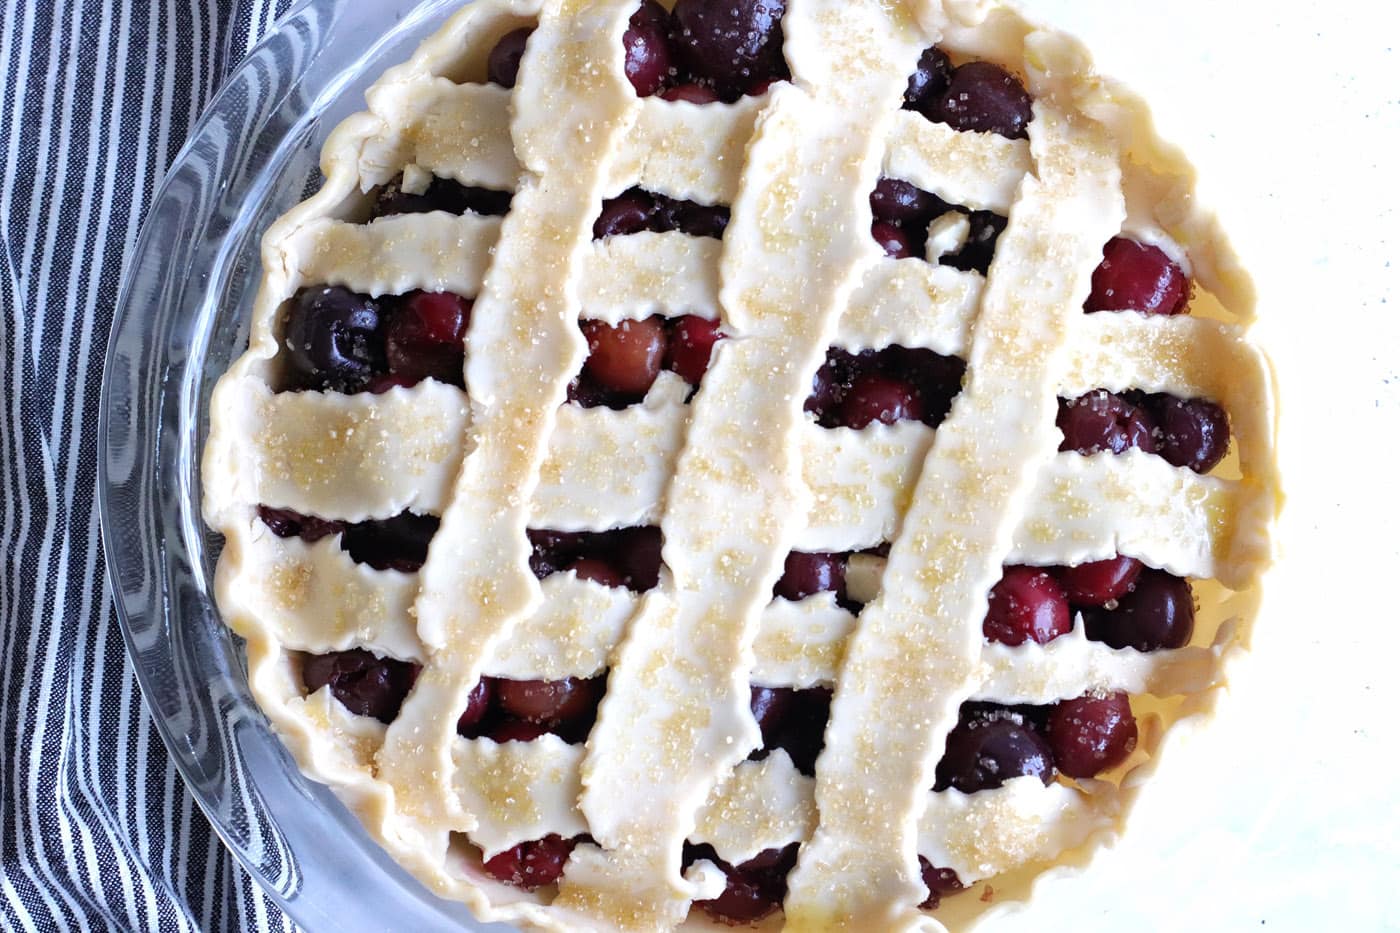 egg washed cherry pie with sugar